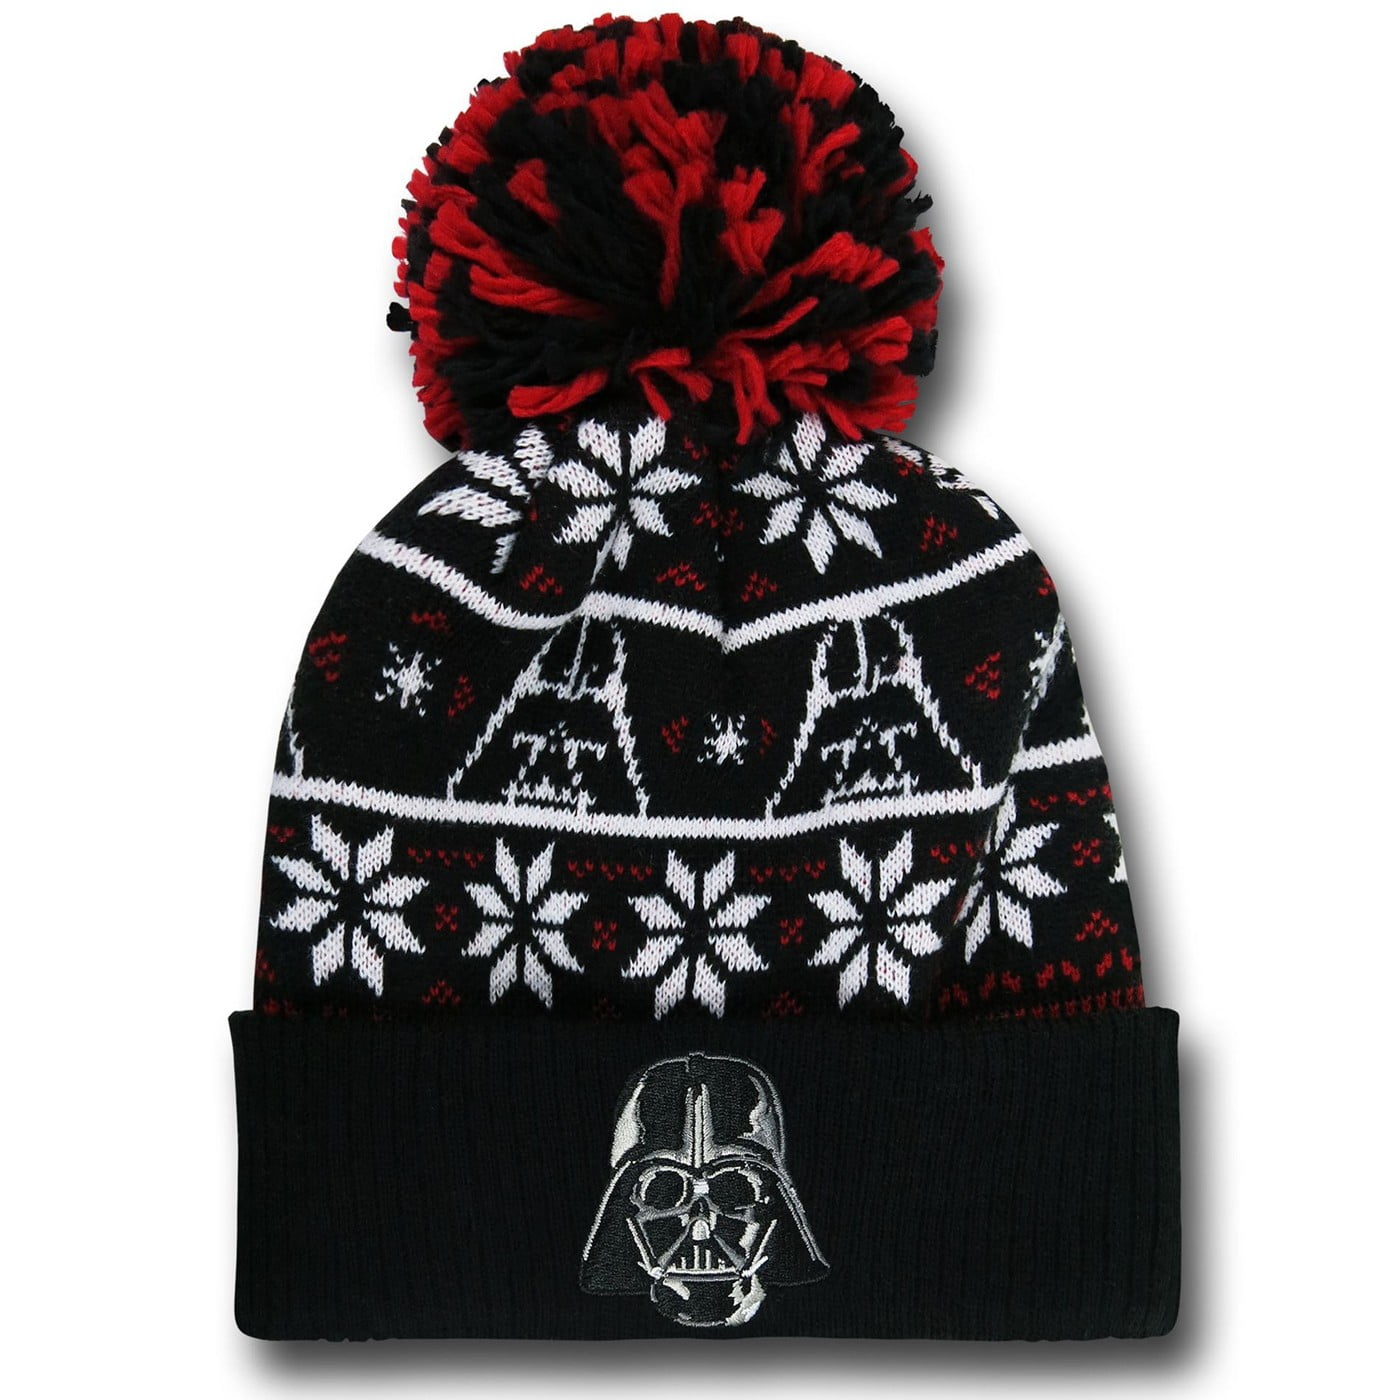 STAR WARS; DARTH VADER WINTER HAT JUNIOR 4-8YR APPROX,NEW WITH TAGS 